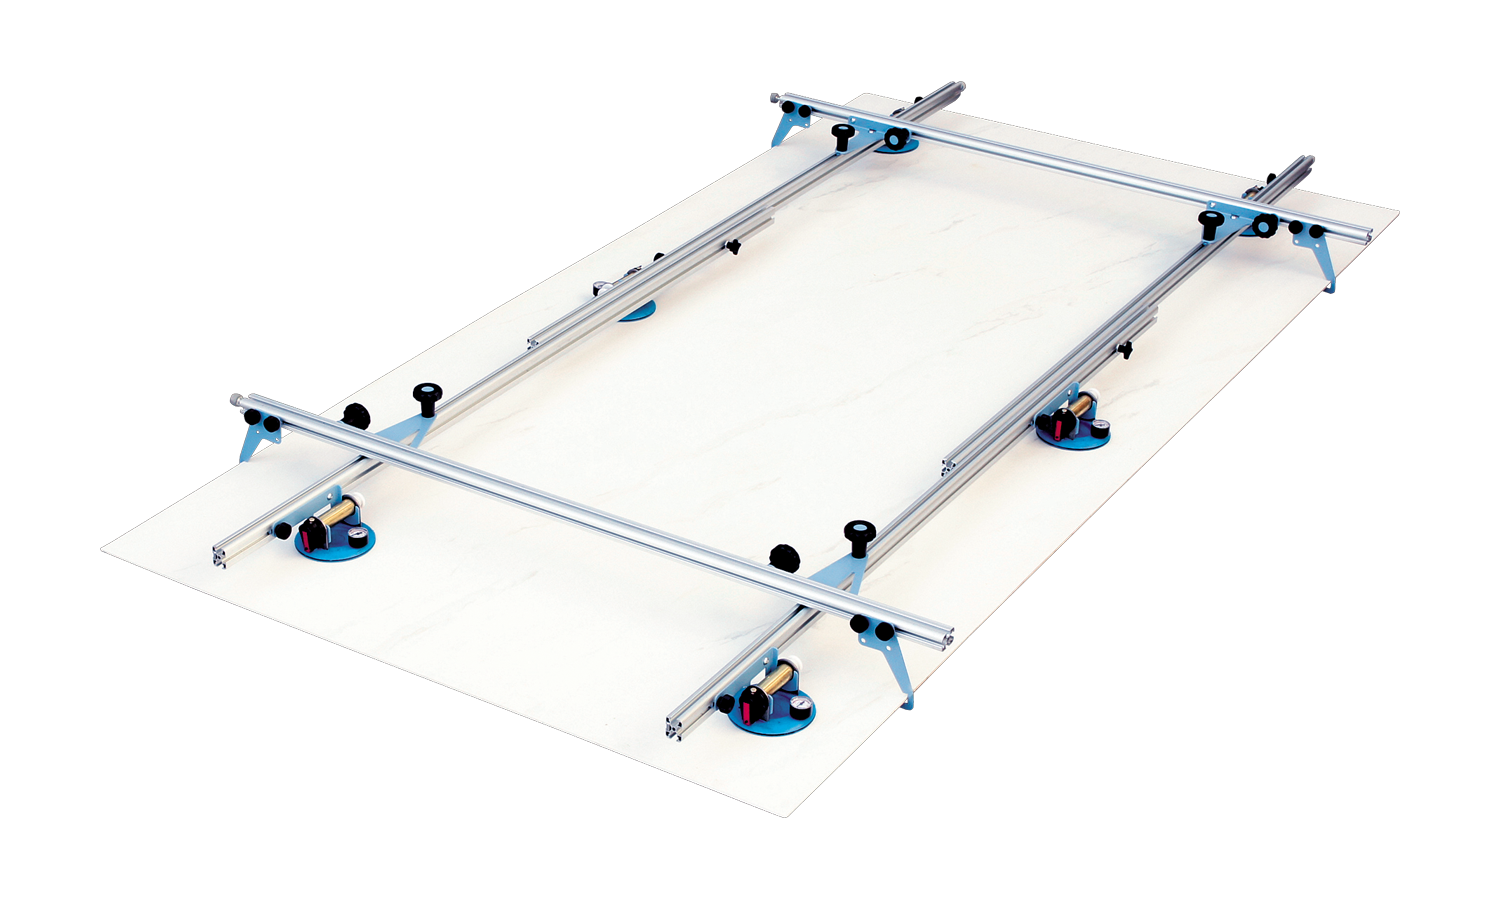 Large Format Tile Lifter, Sigma 1A5 Kera Tile Lifter 134" x 63" (6 Handle Suction Cups)